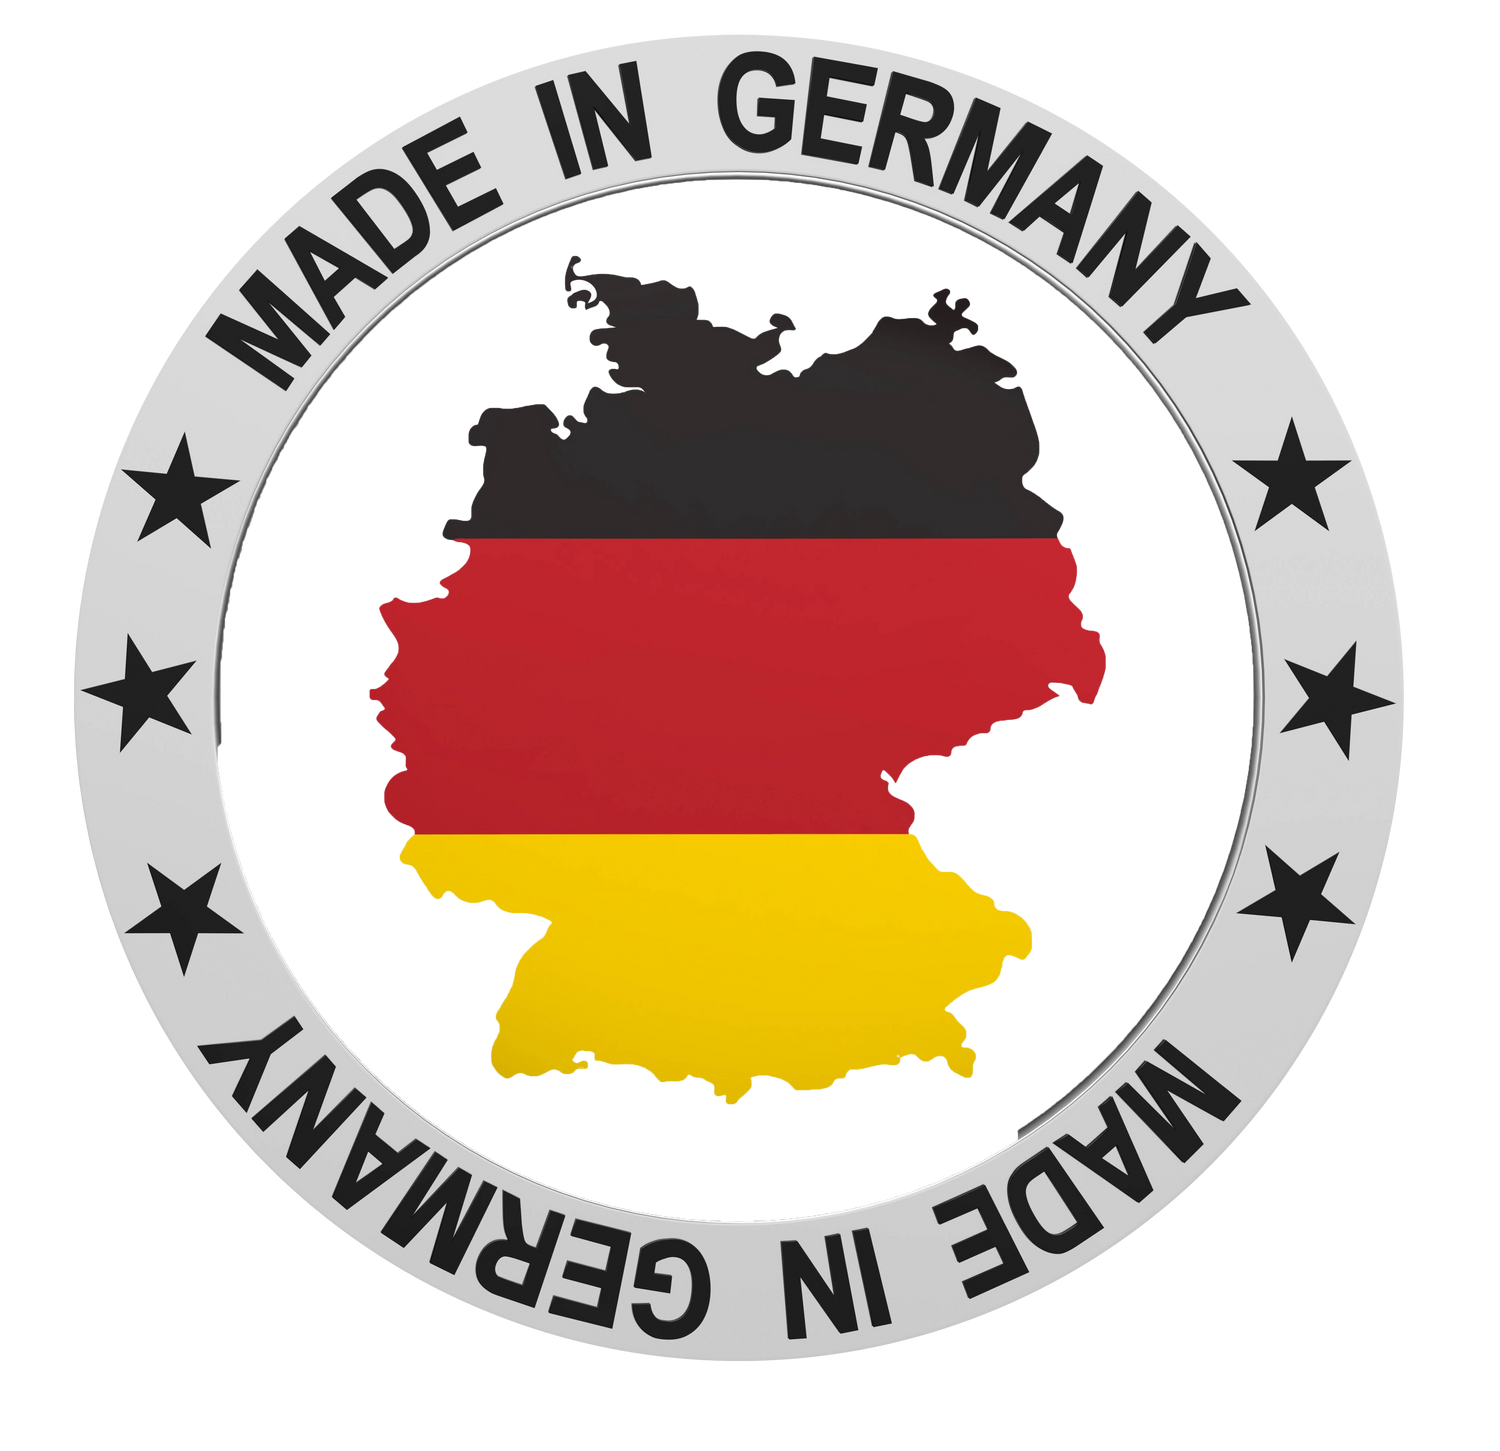 Warum Made in Germany?